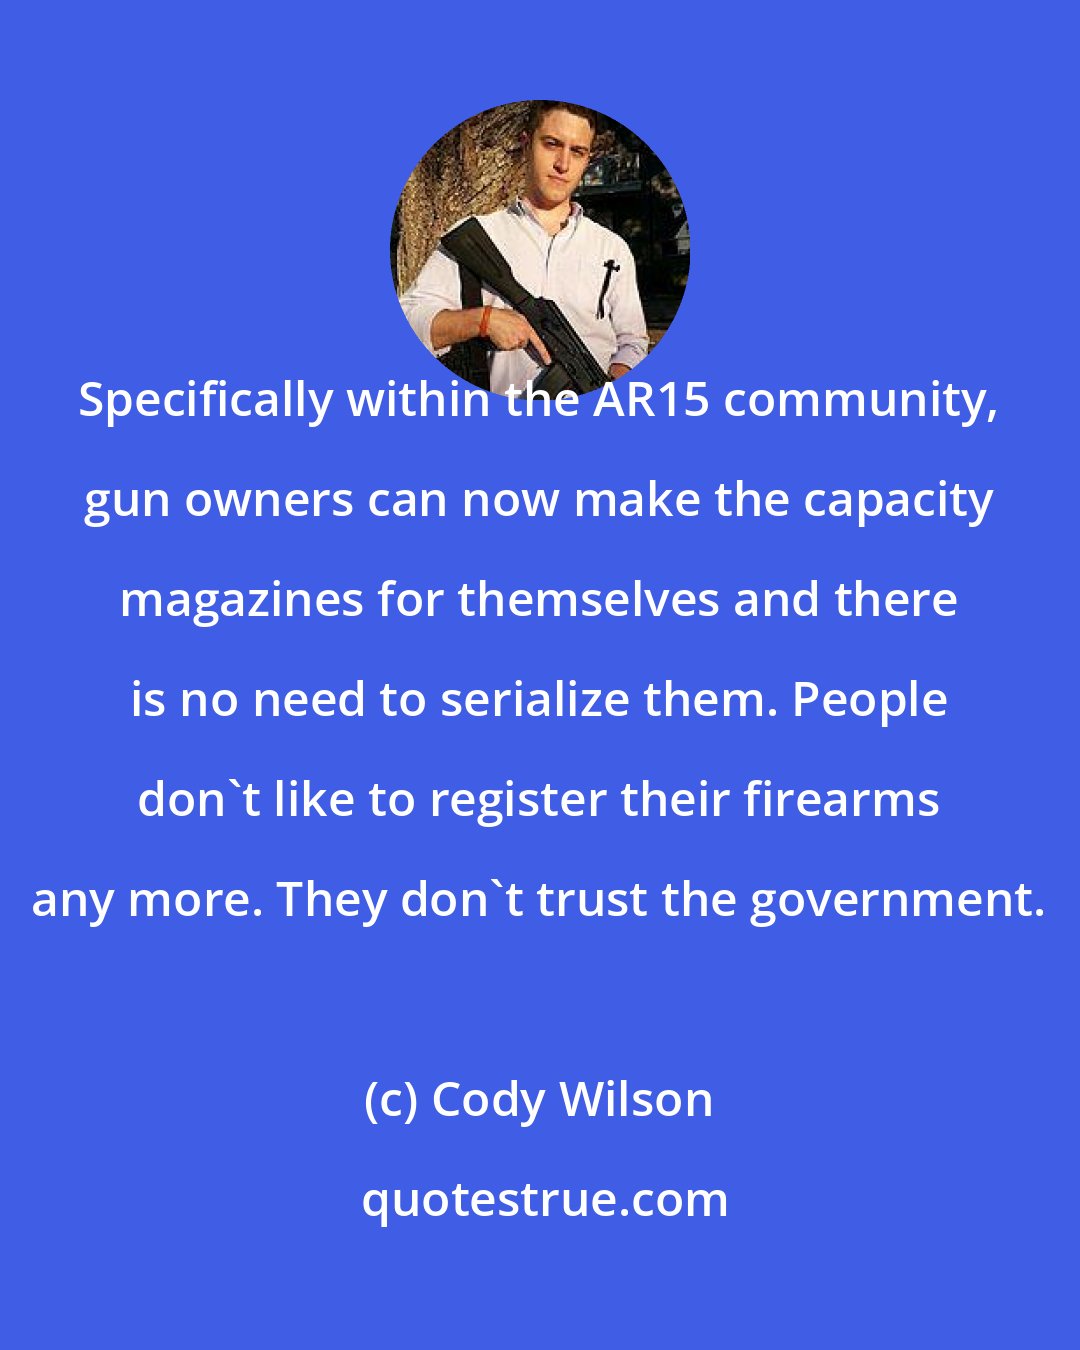 Cody Wilson: Specifically within the AR15 community, gun owners can now make the capacity magazines for themselves and there is no need to serialize them. People don't like to register their firearms any more. They don't trust the government.